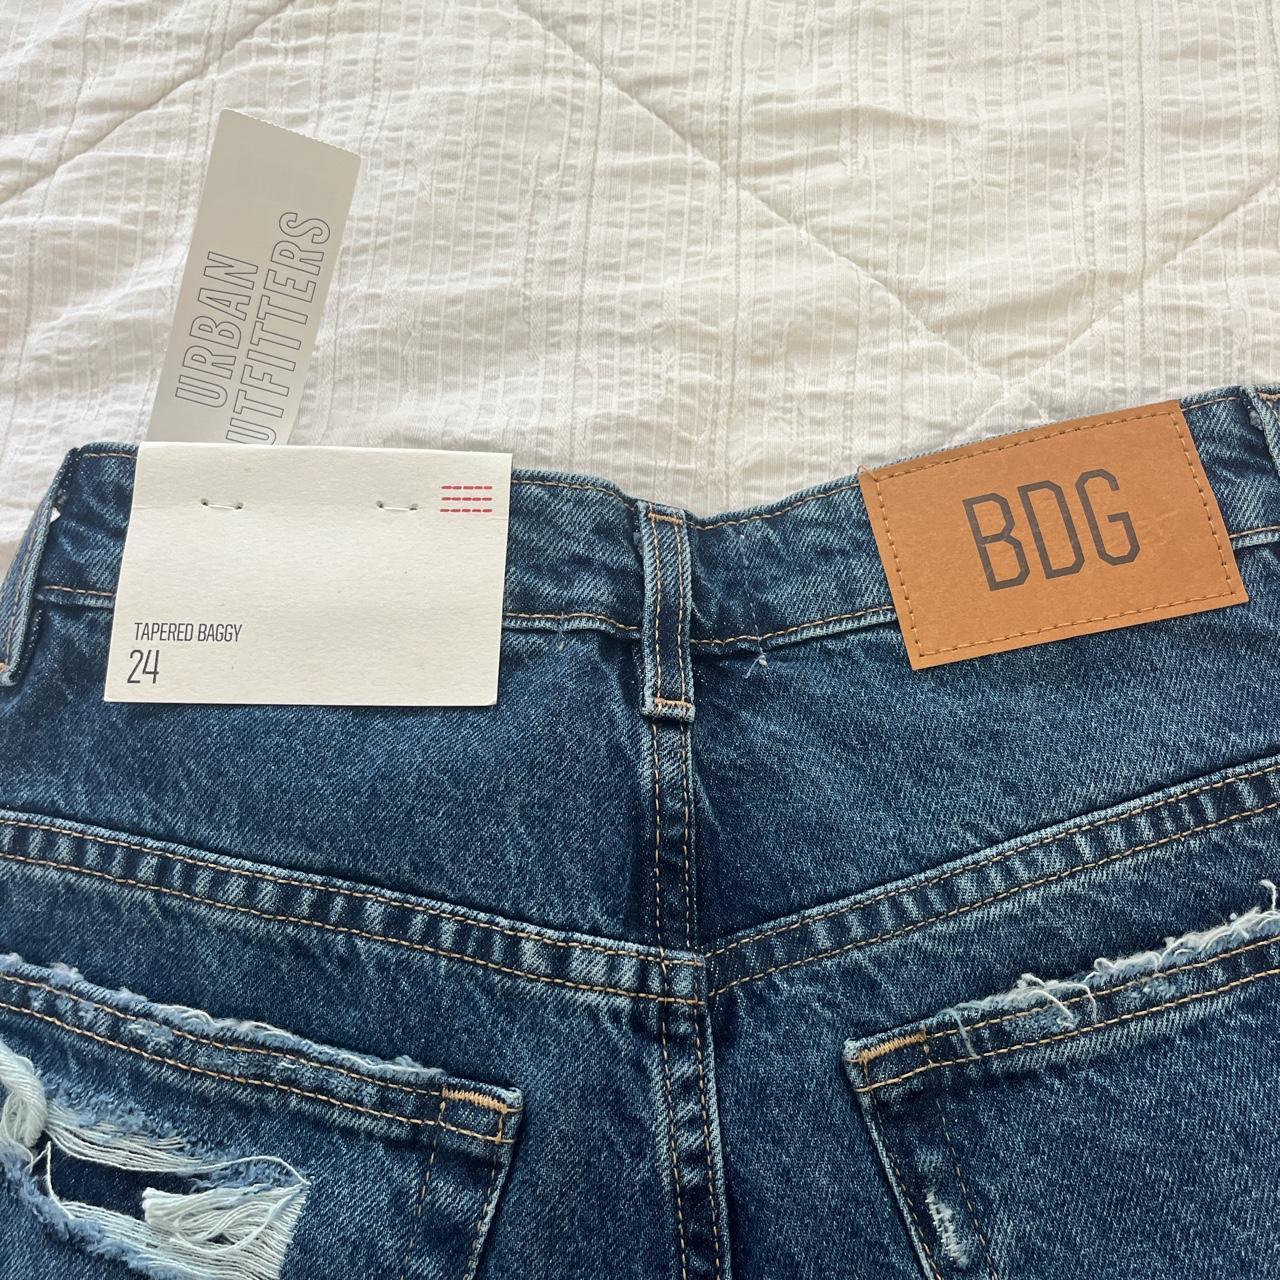 Urban Outfitters baggy ripped jeans Mid rise... - Depop